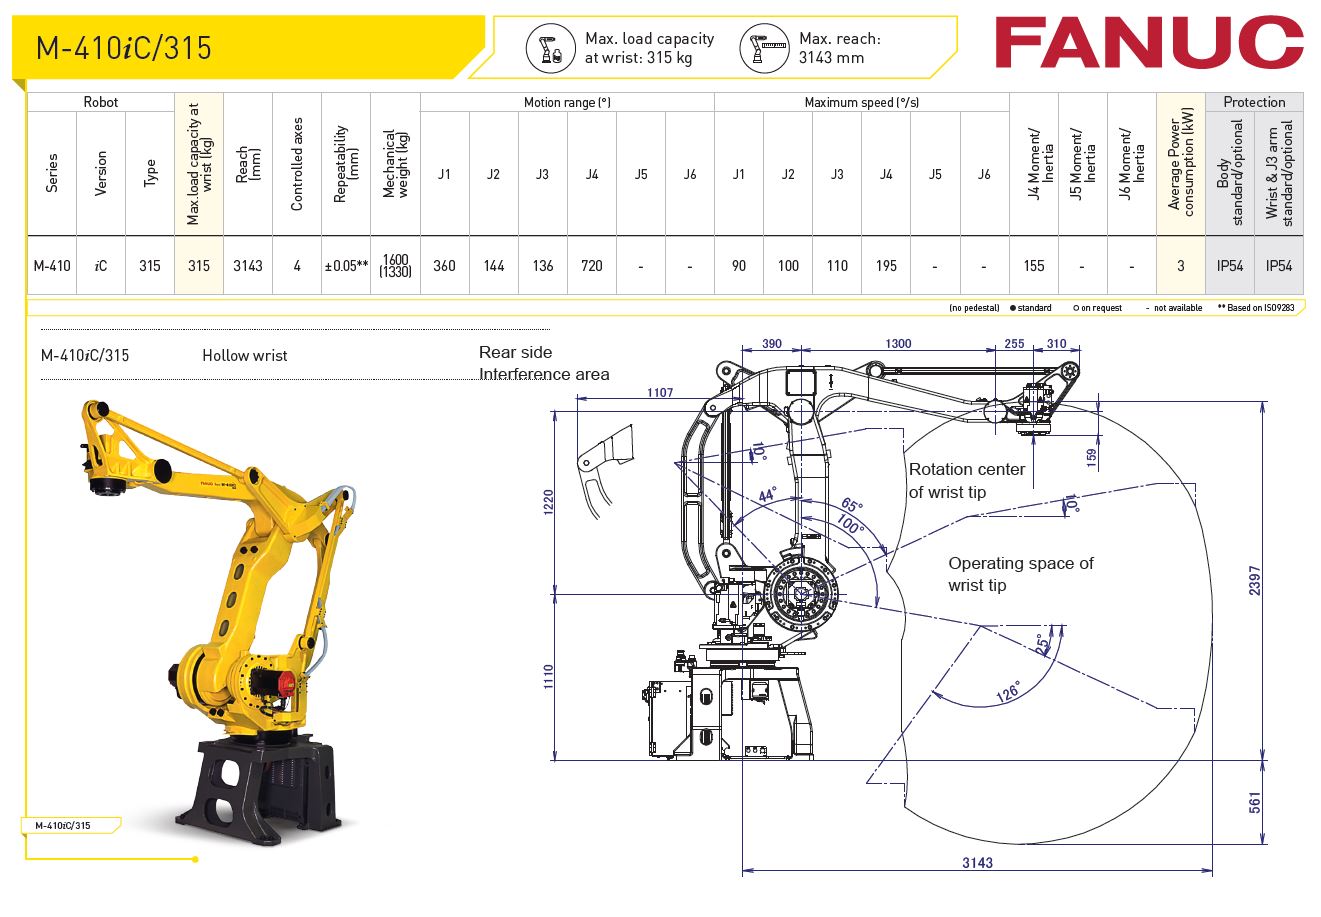 M-410iC-315 Fanuc Robot Specifications - RobotWorld